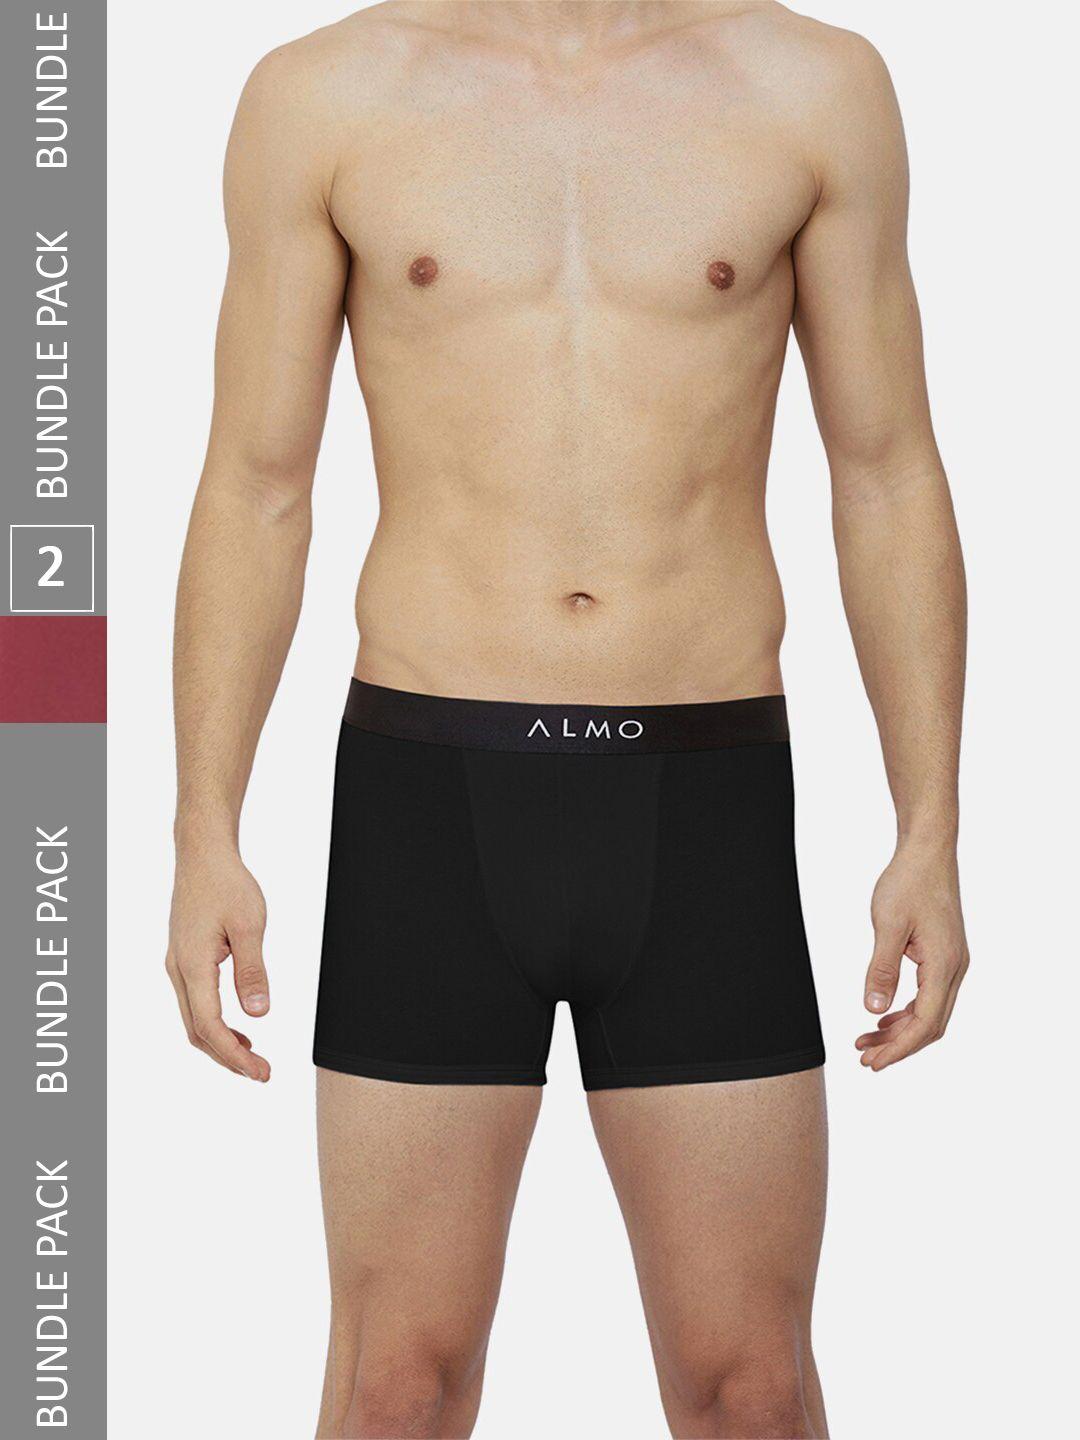 almo wear men pack of 2 combed cotton anti-bacterial metallic trunks